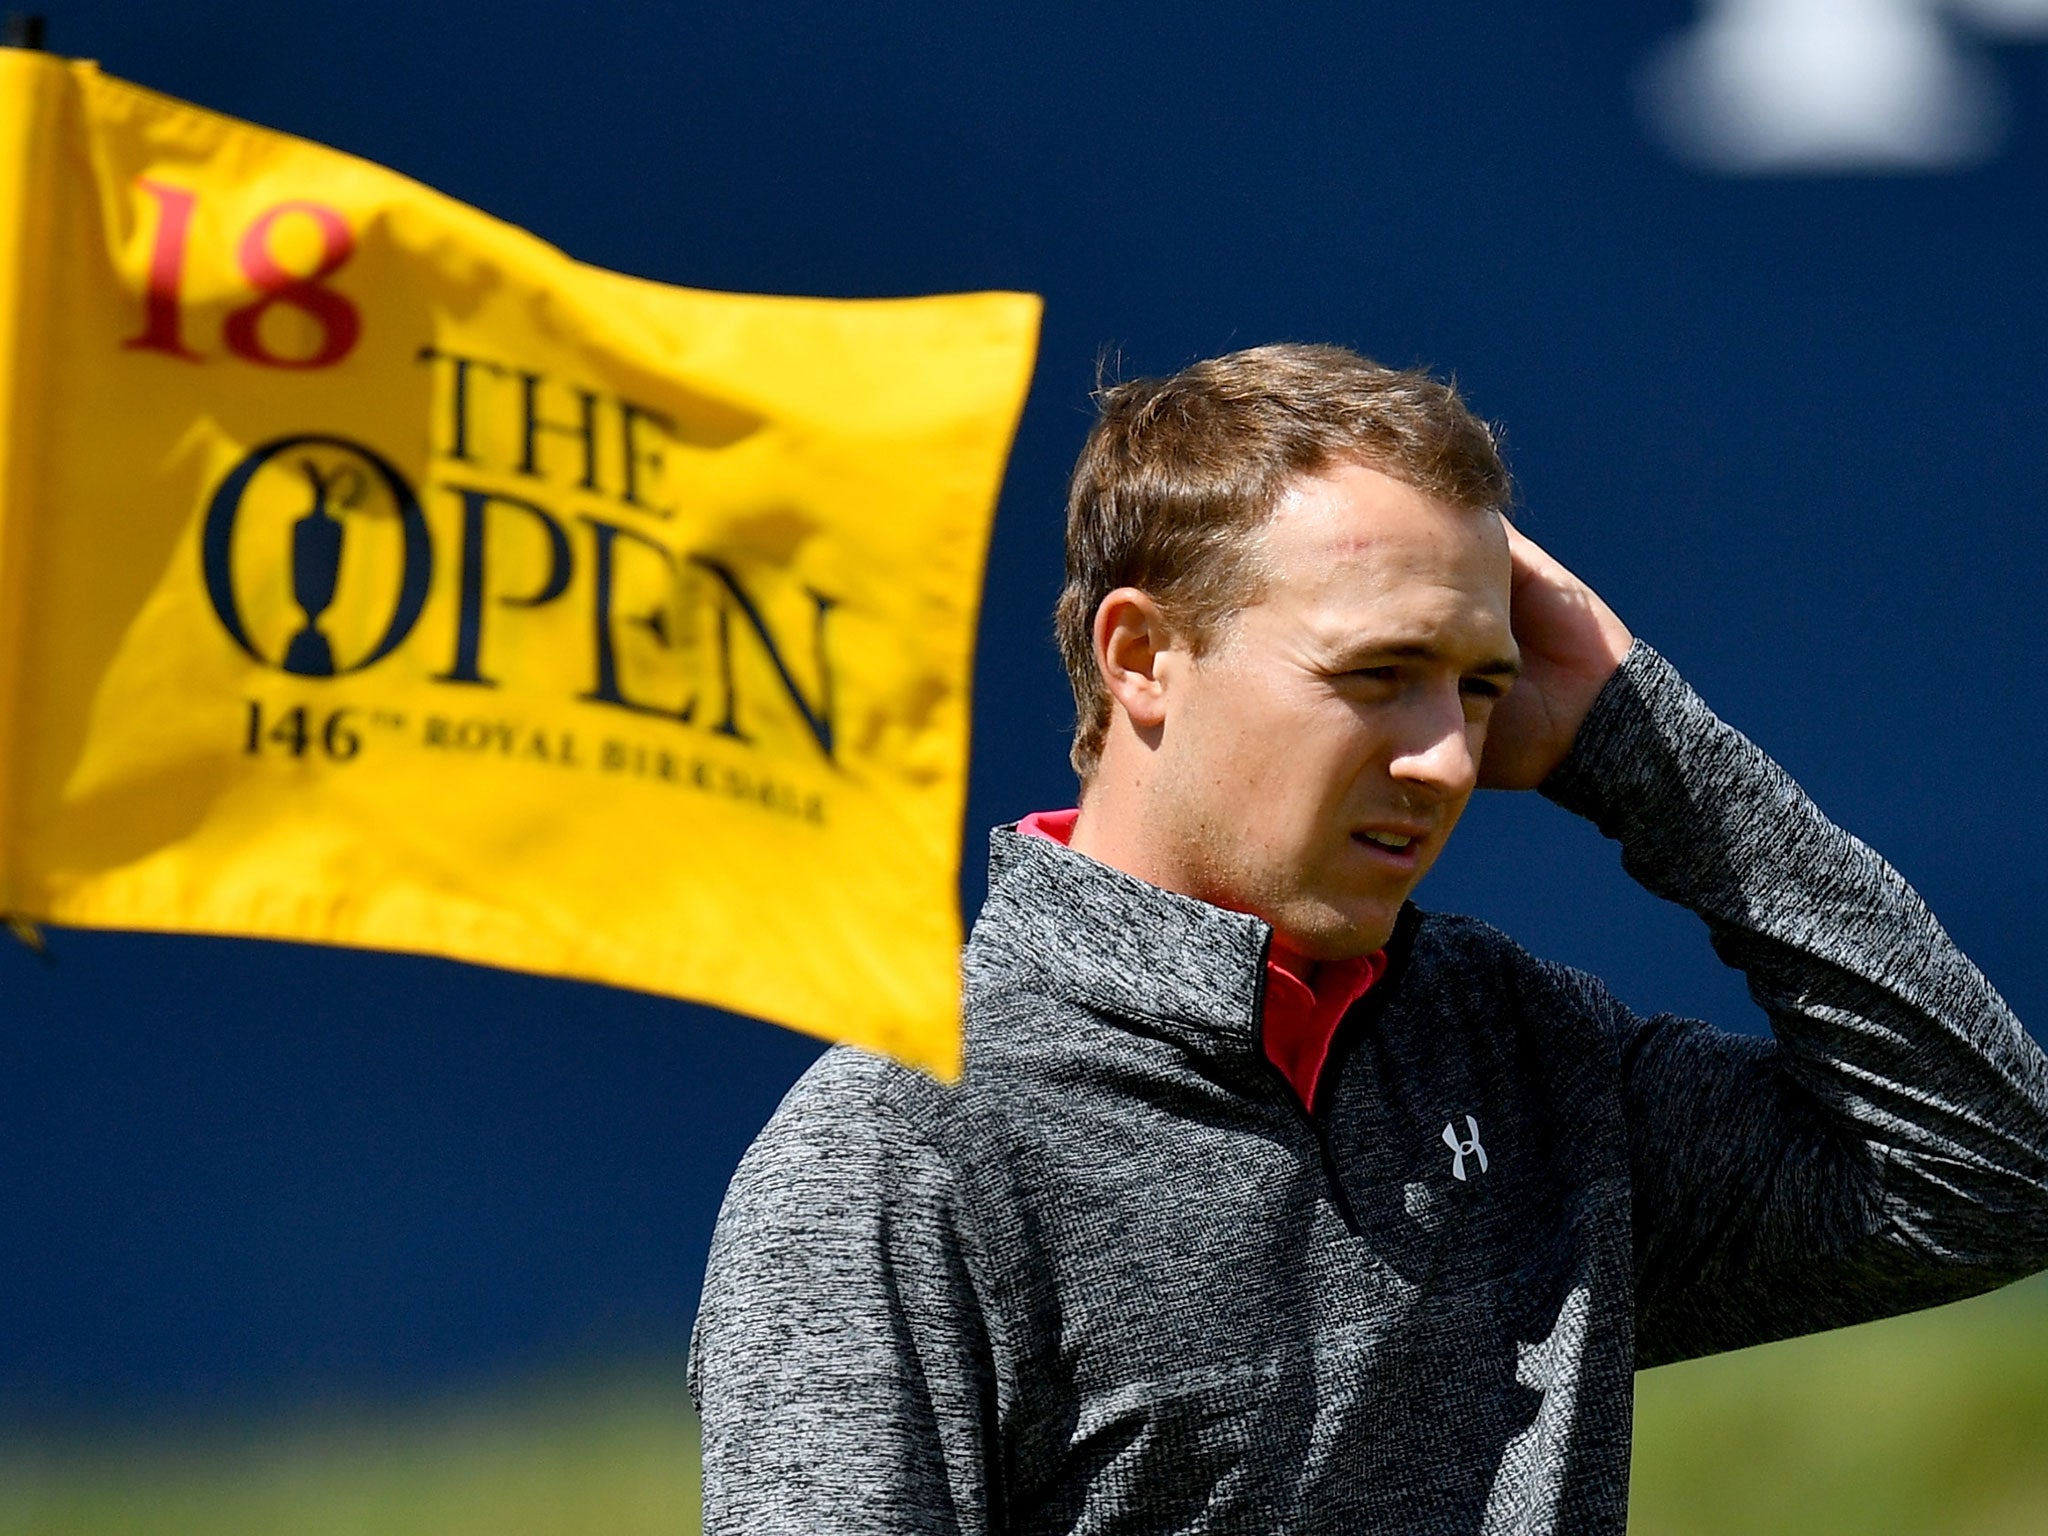 Jordan Spieth will be looking to maintain his form for the second round